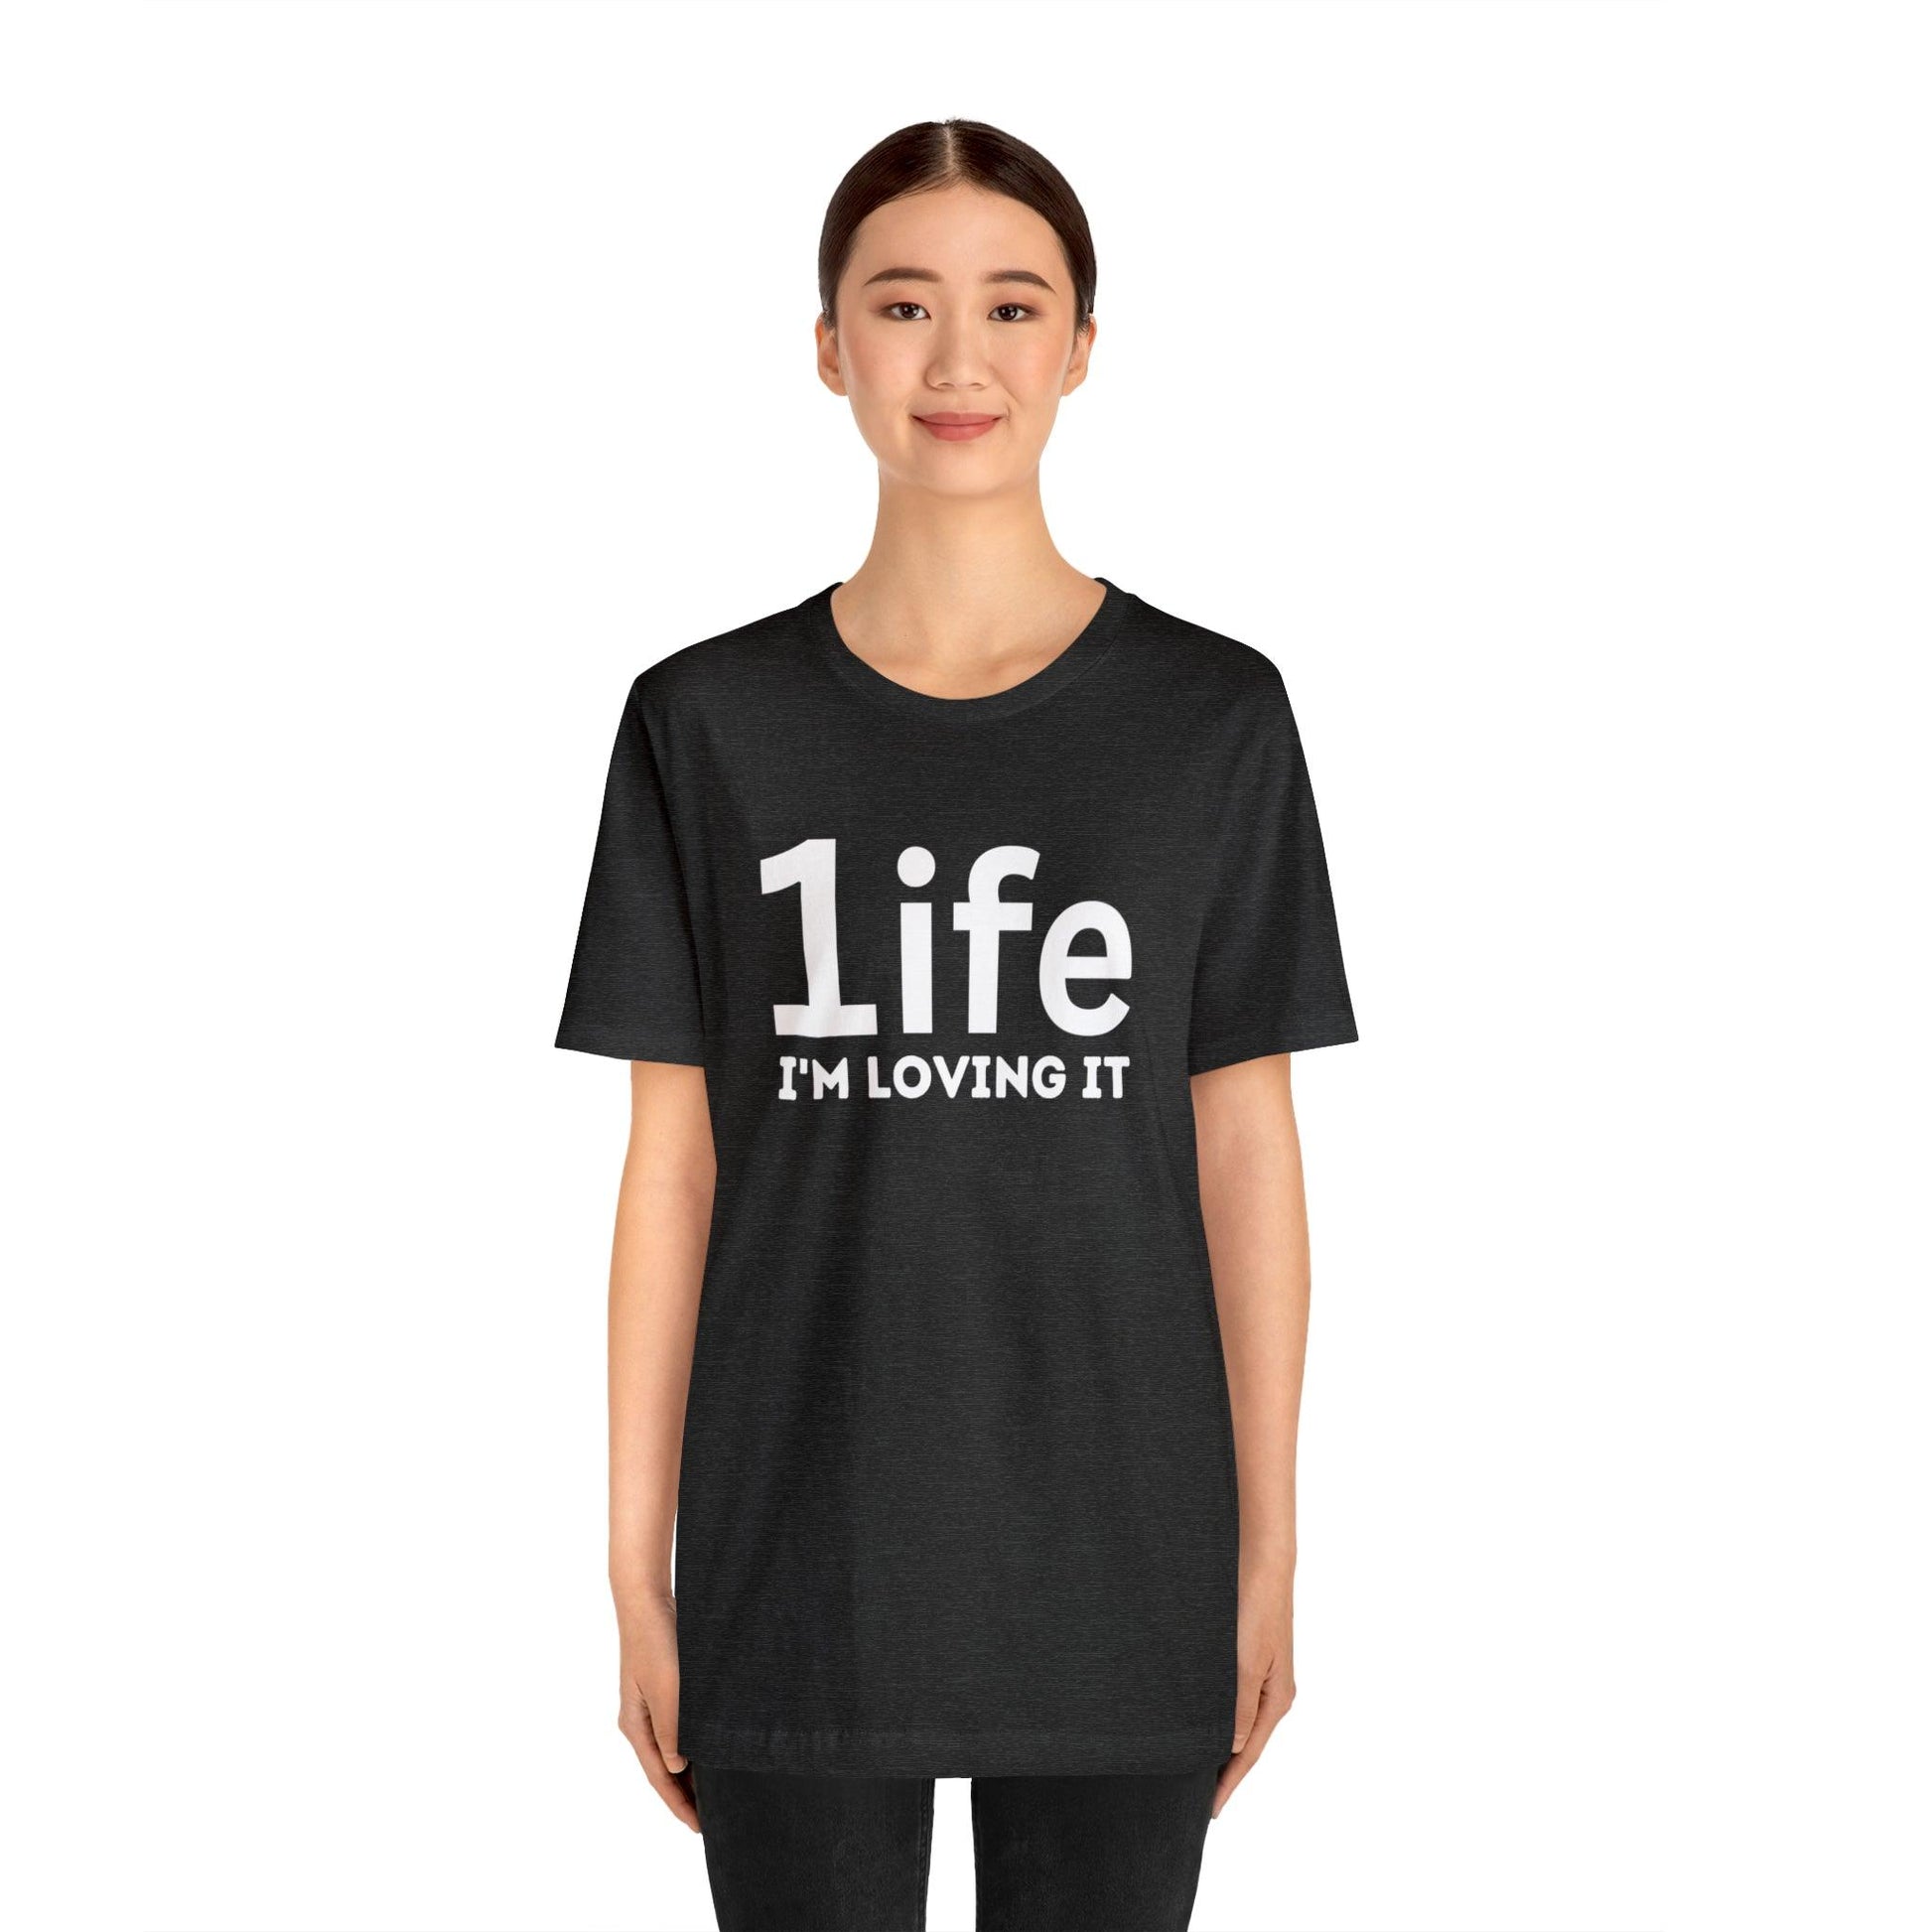 One life I'M Loving It Shirt Retro 1life shirt Live Your Life You Only Have One Life To Live Retro Shirt - Giftsmojo